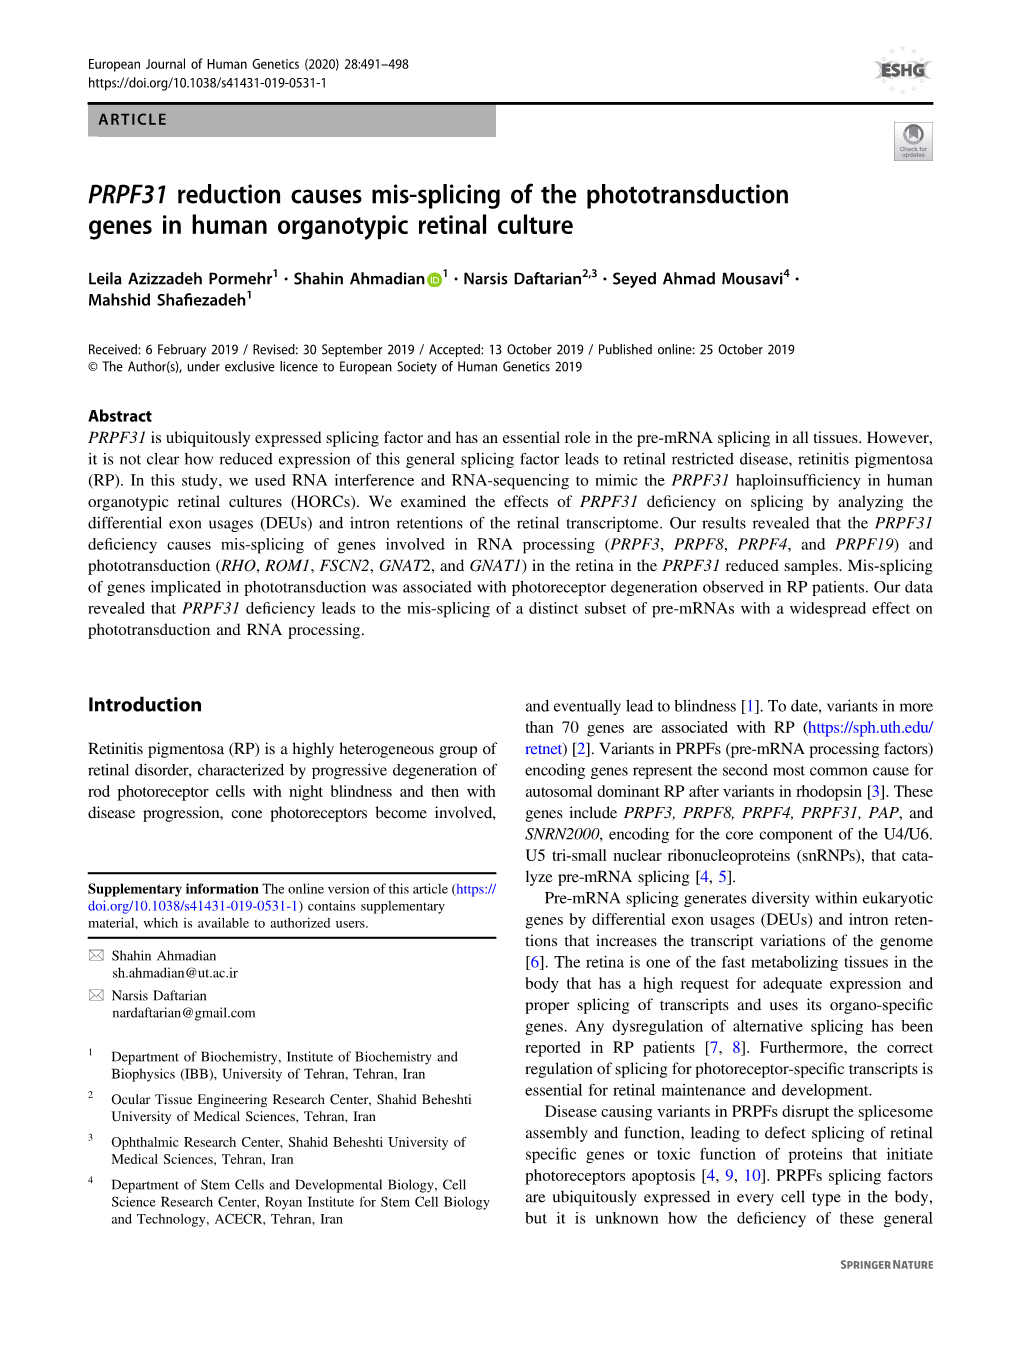 PRPF31 Reduction Causes Mis-Splicing of the Phototransduction Genes in Human Organotypic Retinal Culture